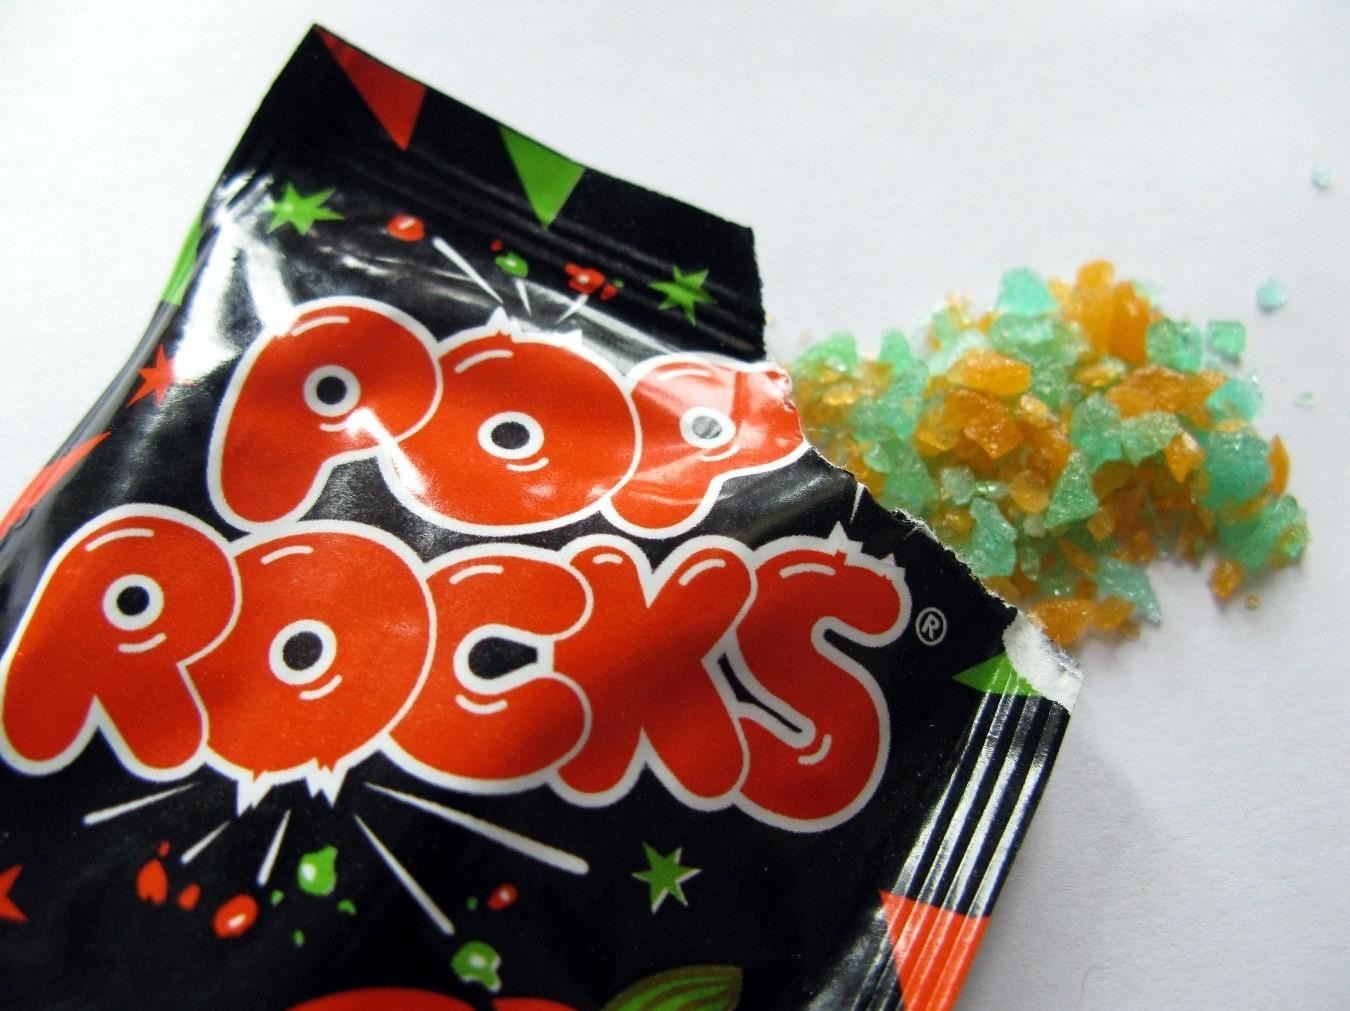 Pop Rocks Recipes: Add Some Fireworks to Your Food